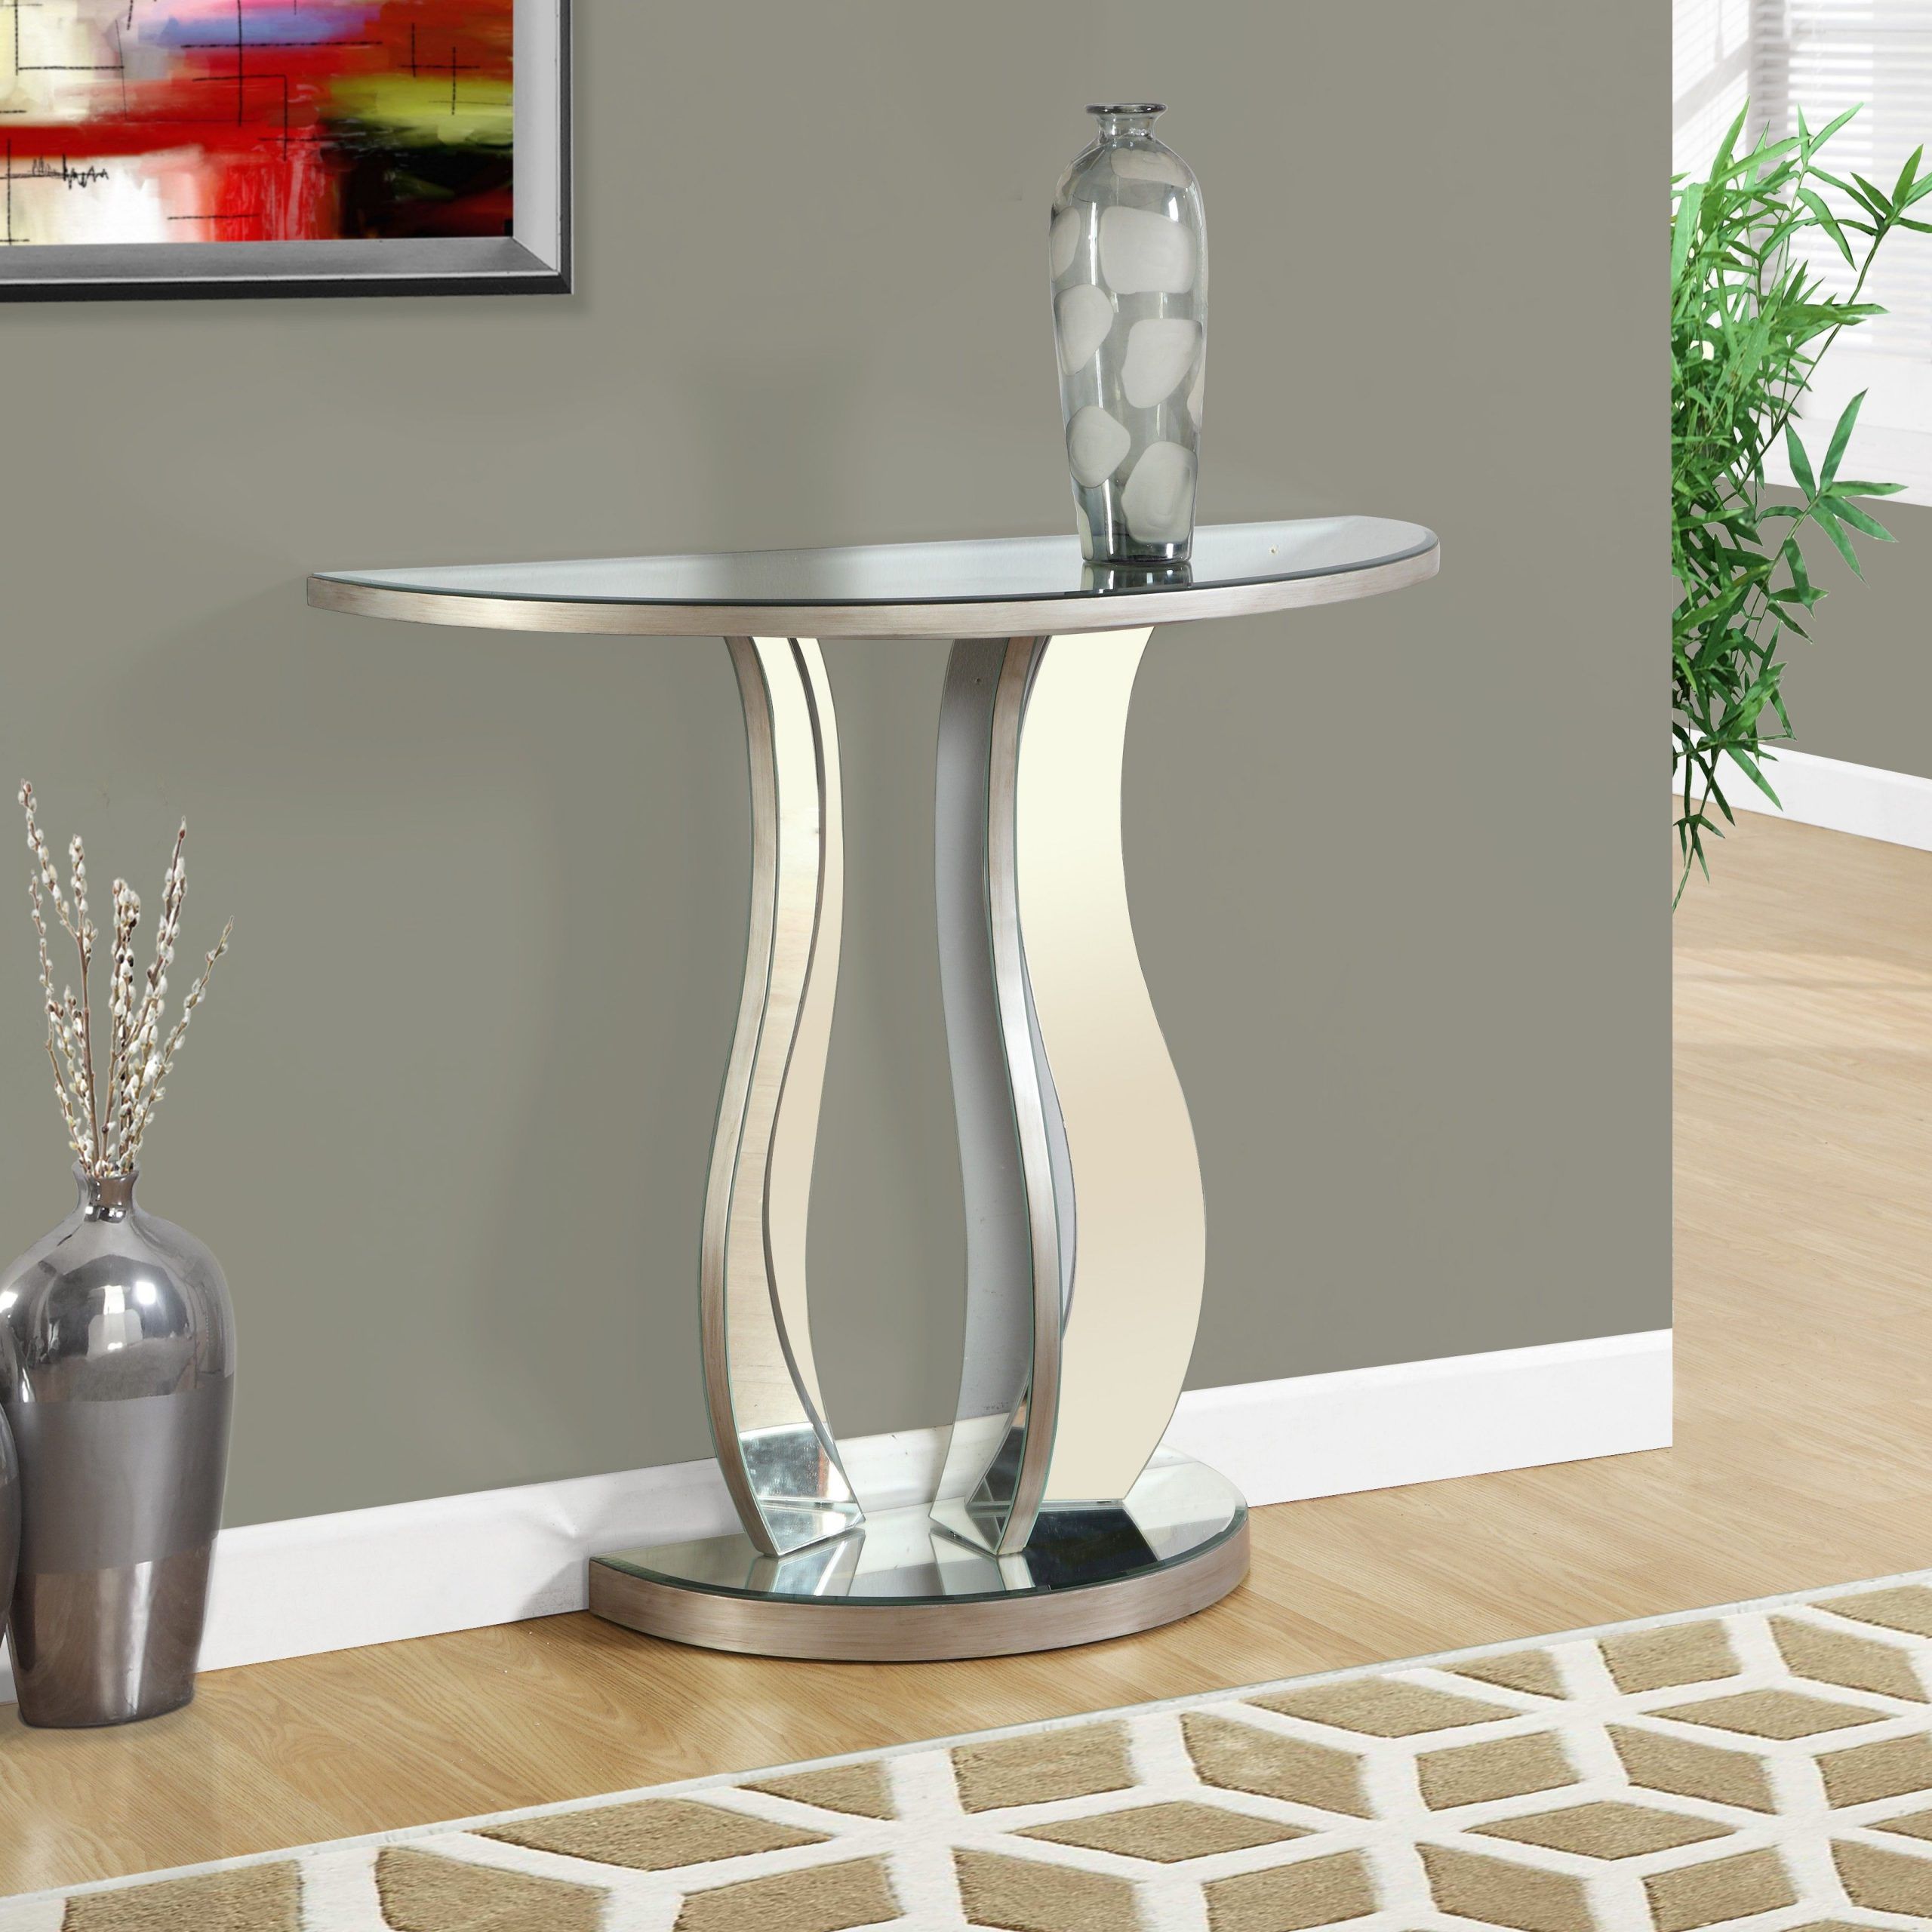 Brushed Pewter Console Table With Mirrored Top | Mirrored Console Table With Regard To Mirrored Console Tables (View 17 of 20)